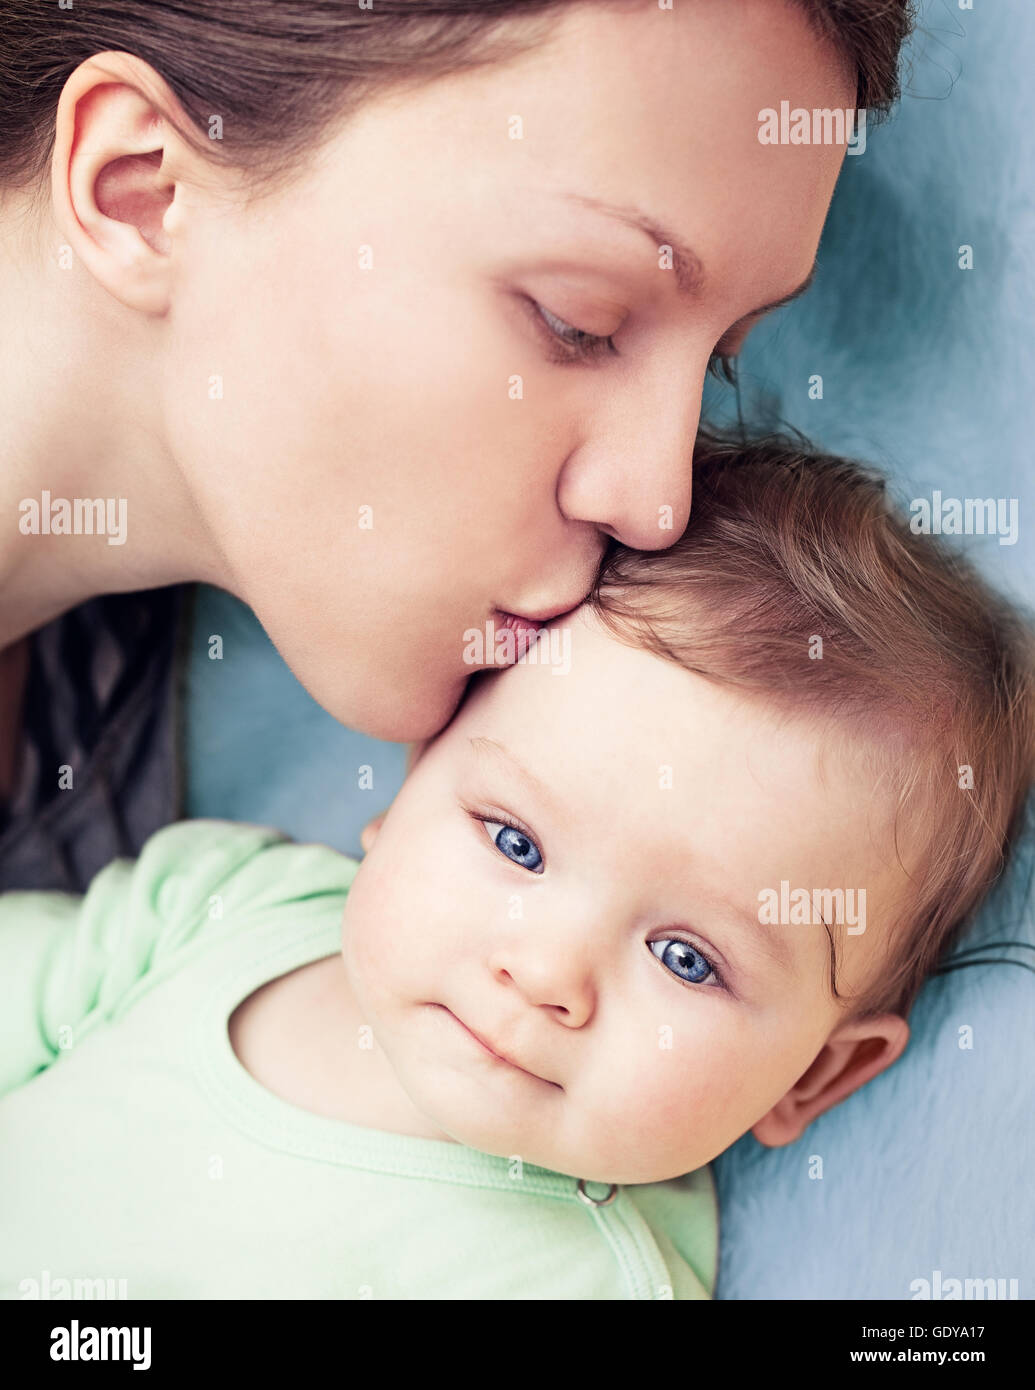 Baby boy with beautiful blue eyes being kissed by his mother. Stock Photo